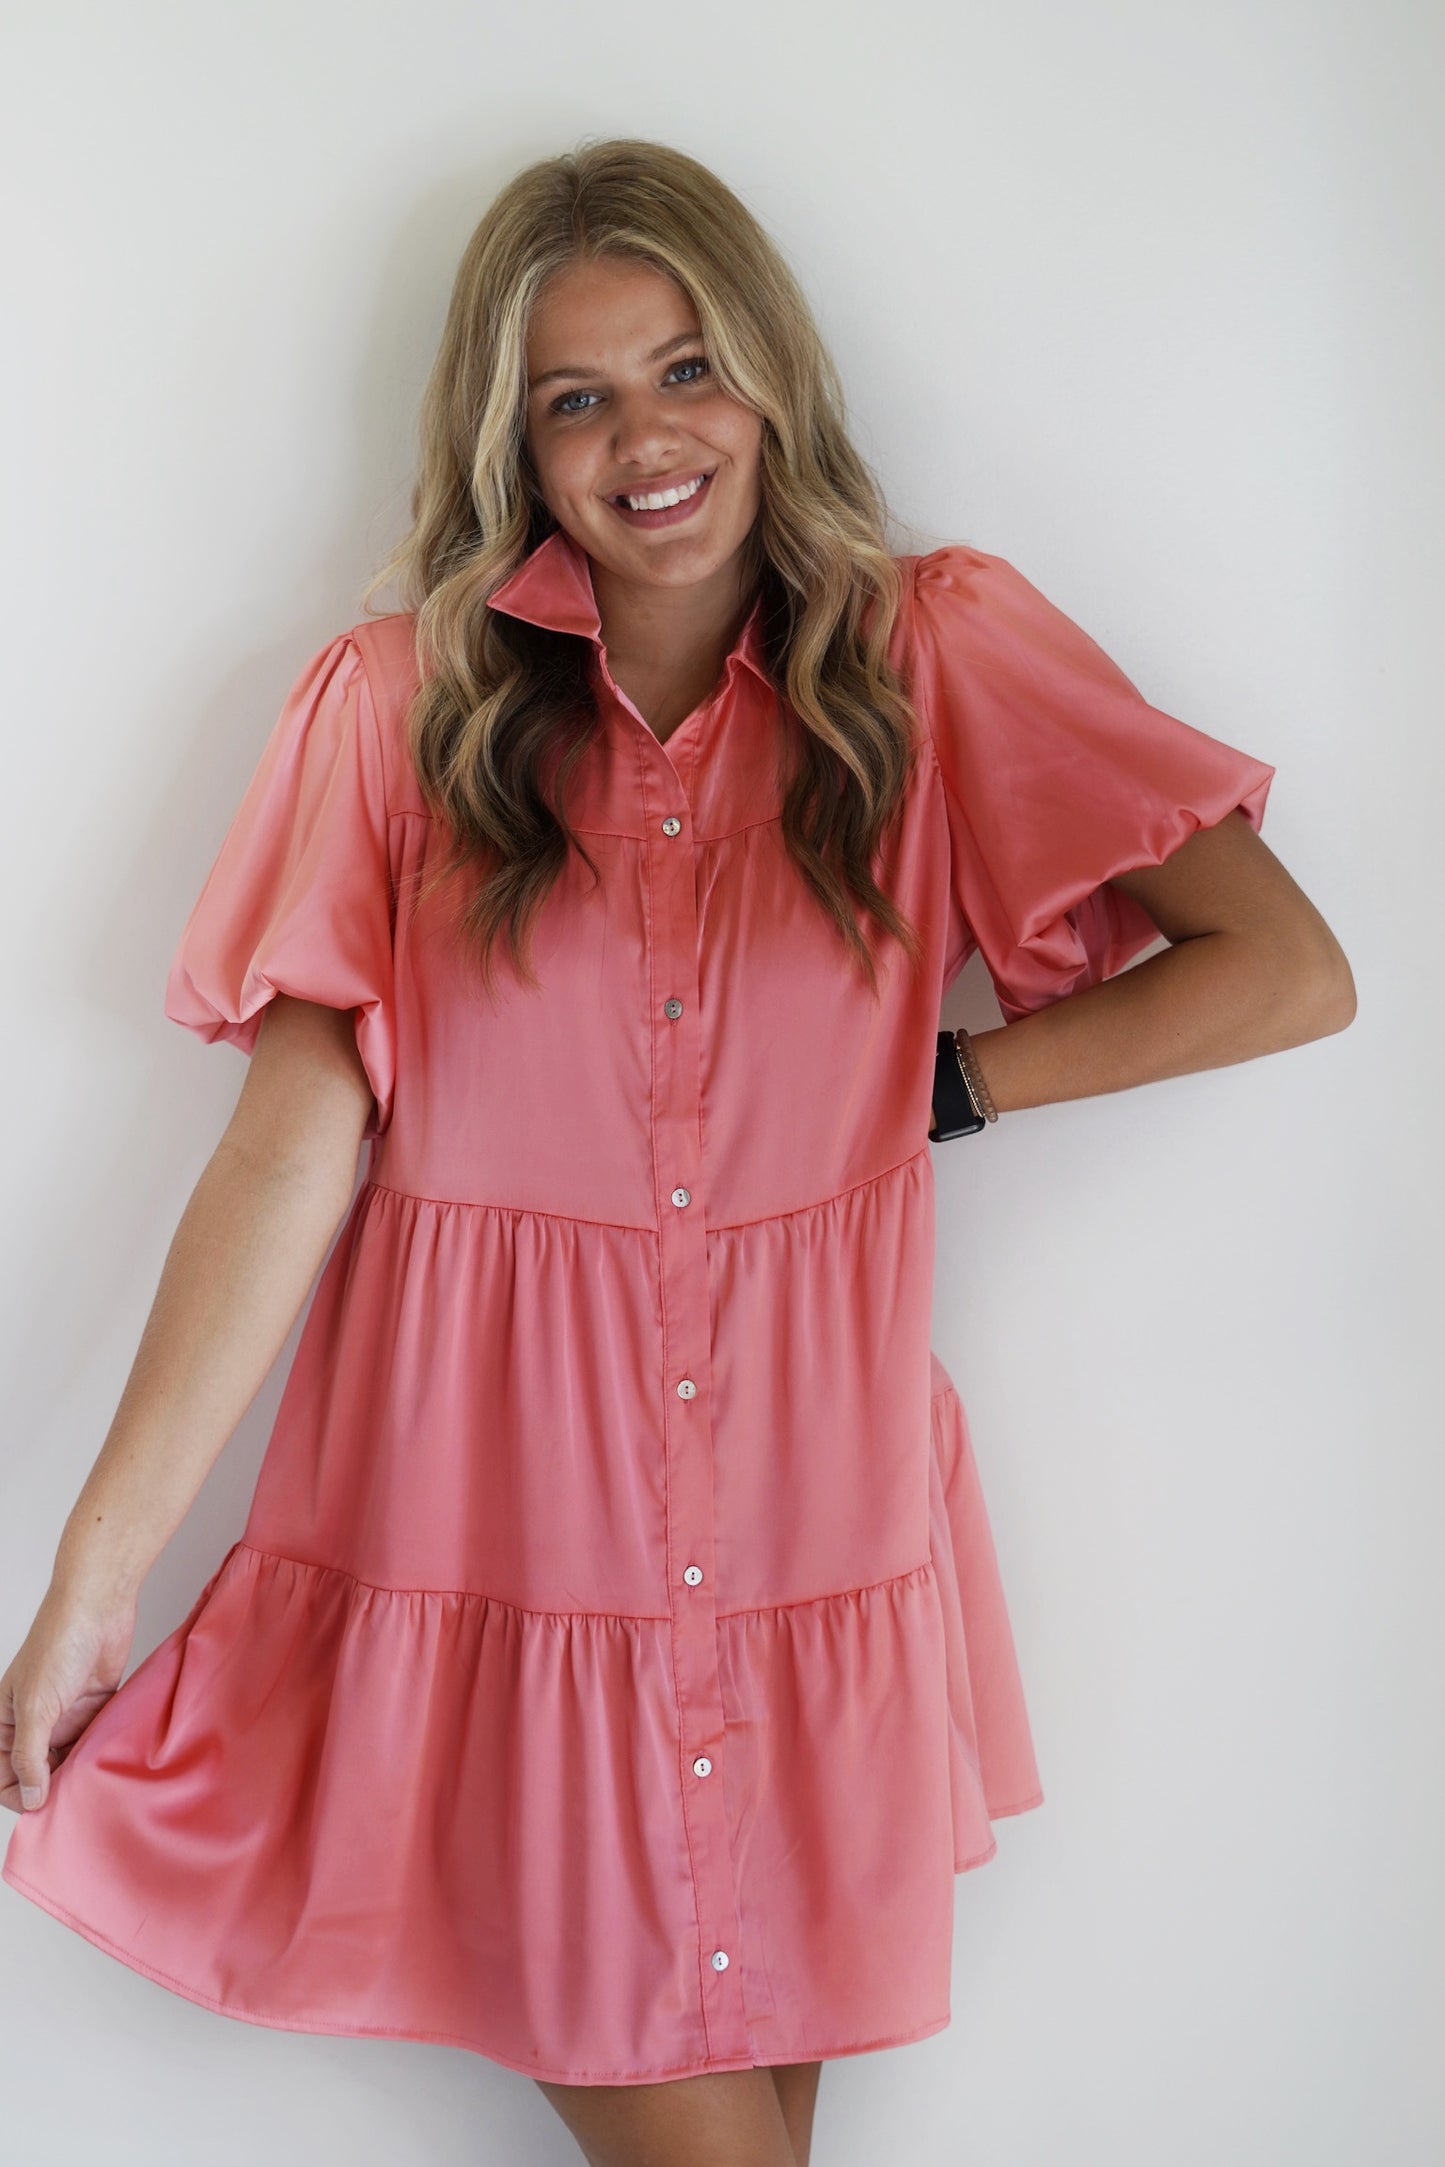 Mia Satin Puff Mini Dress Button Down Collar Short Sleeves with Puff Color Pink 95% Polyester  5% Spandex Hand Wash Cold, Do Not Bleach, Hang or Line dry, Low Iron if Needed Model is wearing size: Small